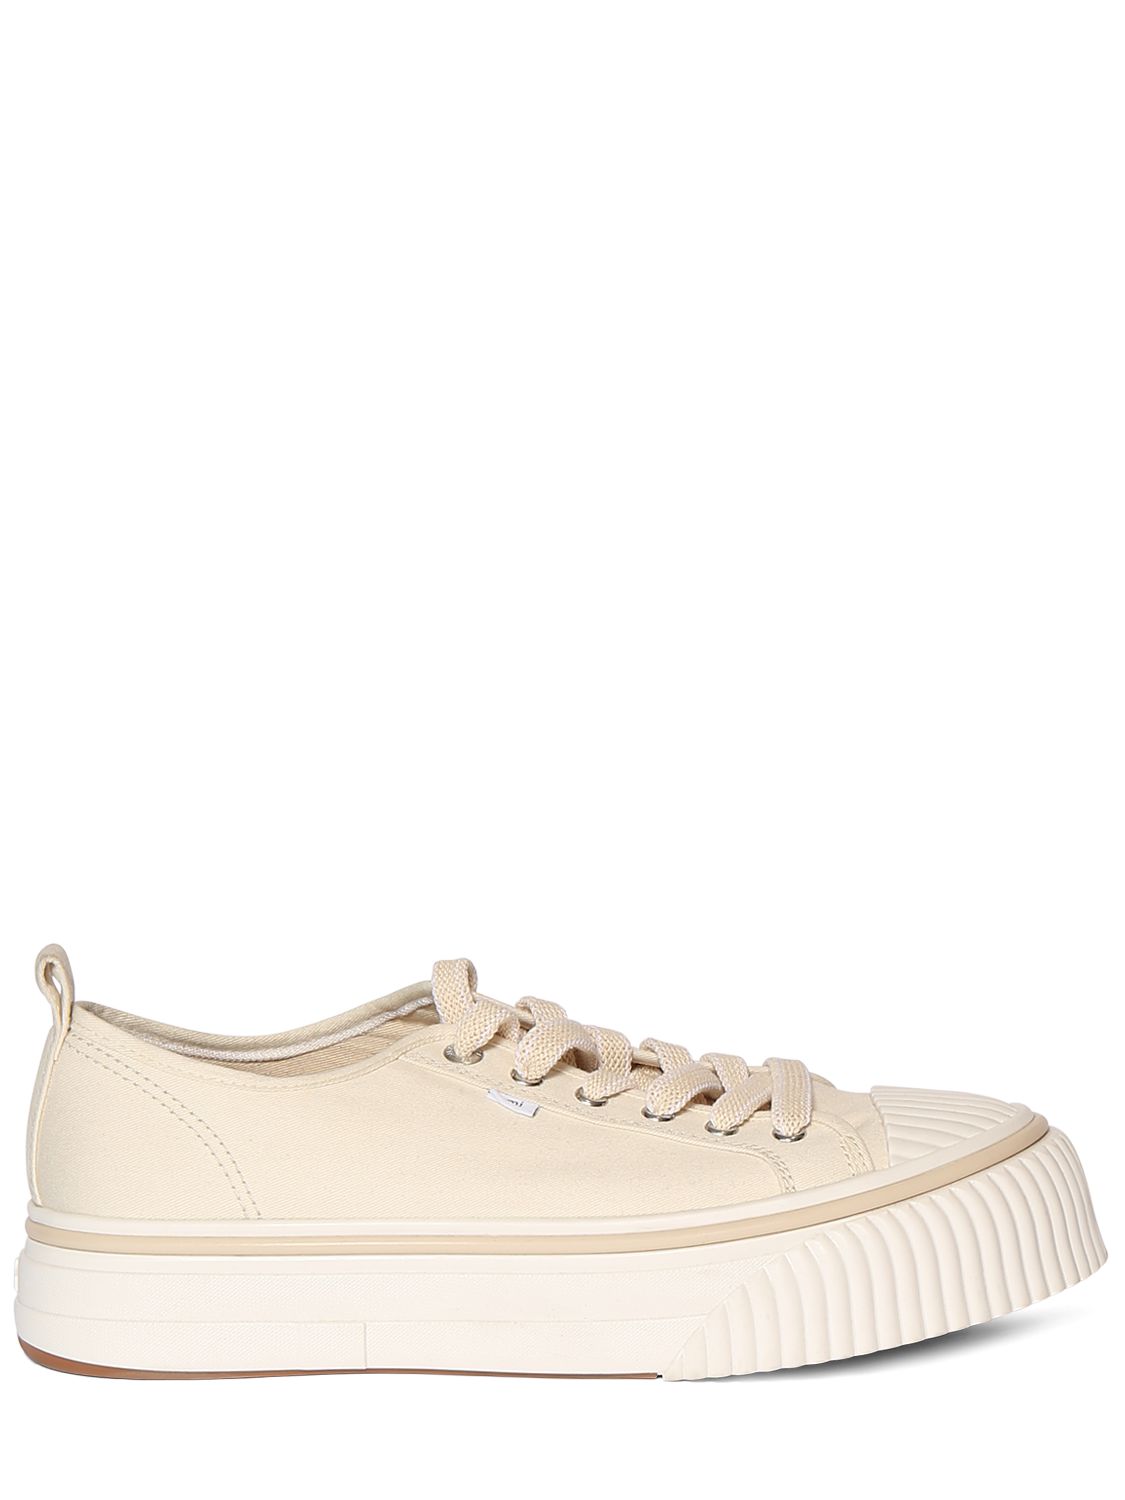 Ami Cotton Low Top Sneakers